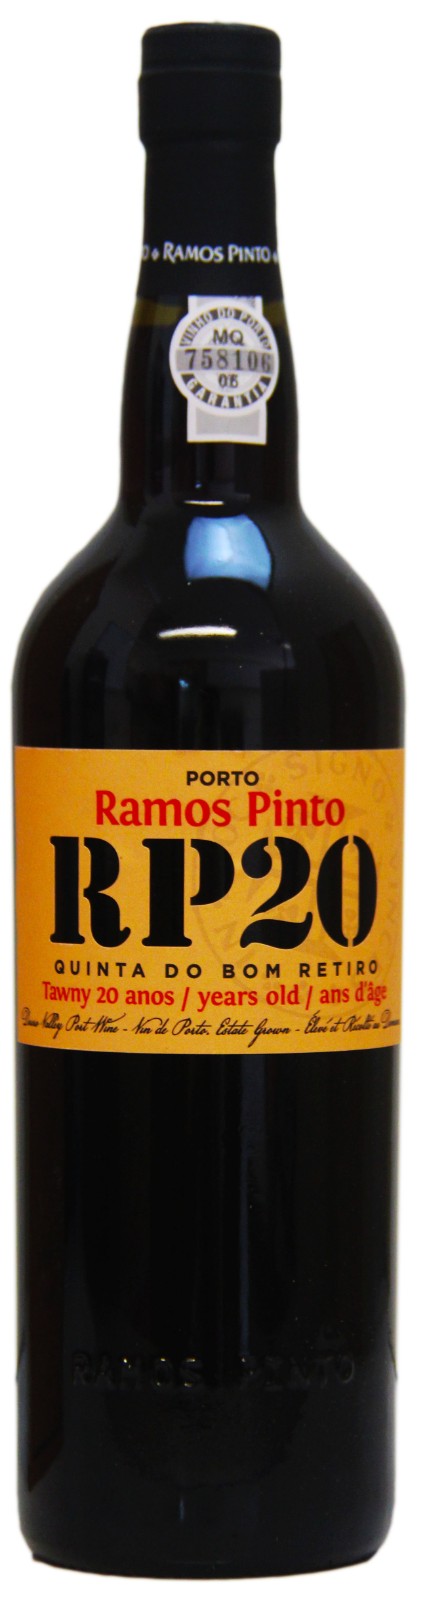 Year Old Tawny Ramos Year Vintage Port, 20 Port 20 | Wine Pinto, 2004 and